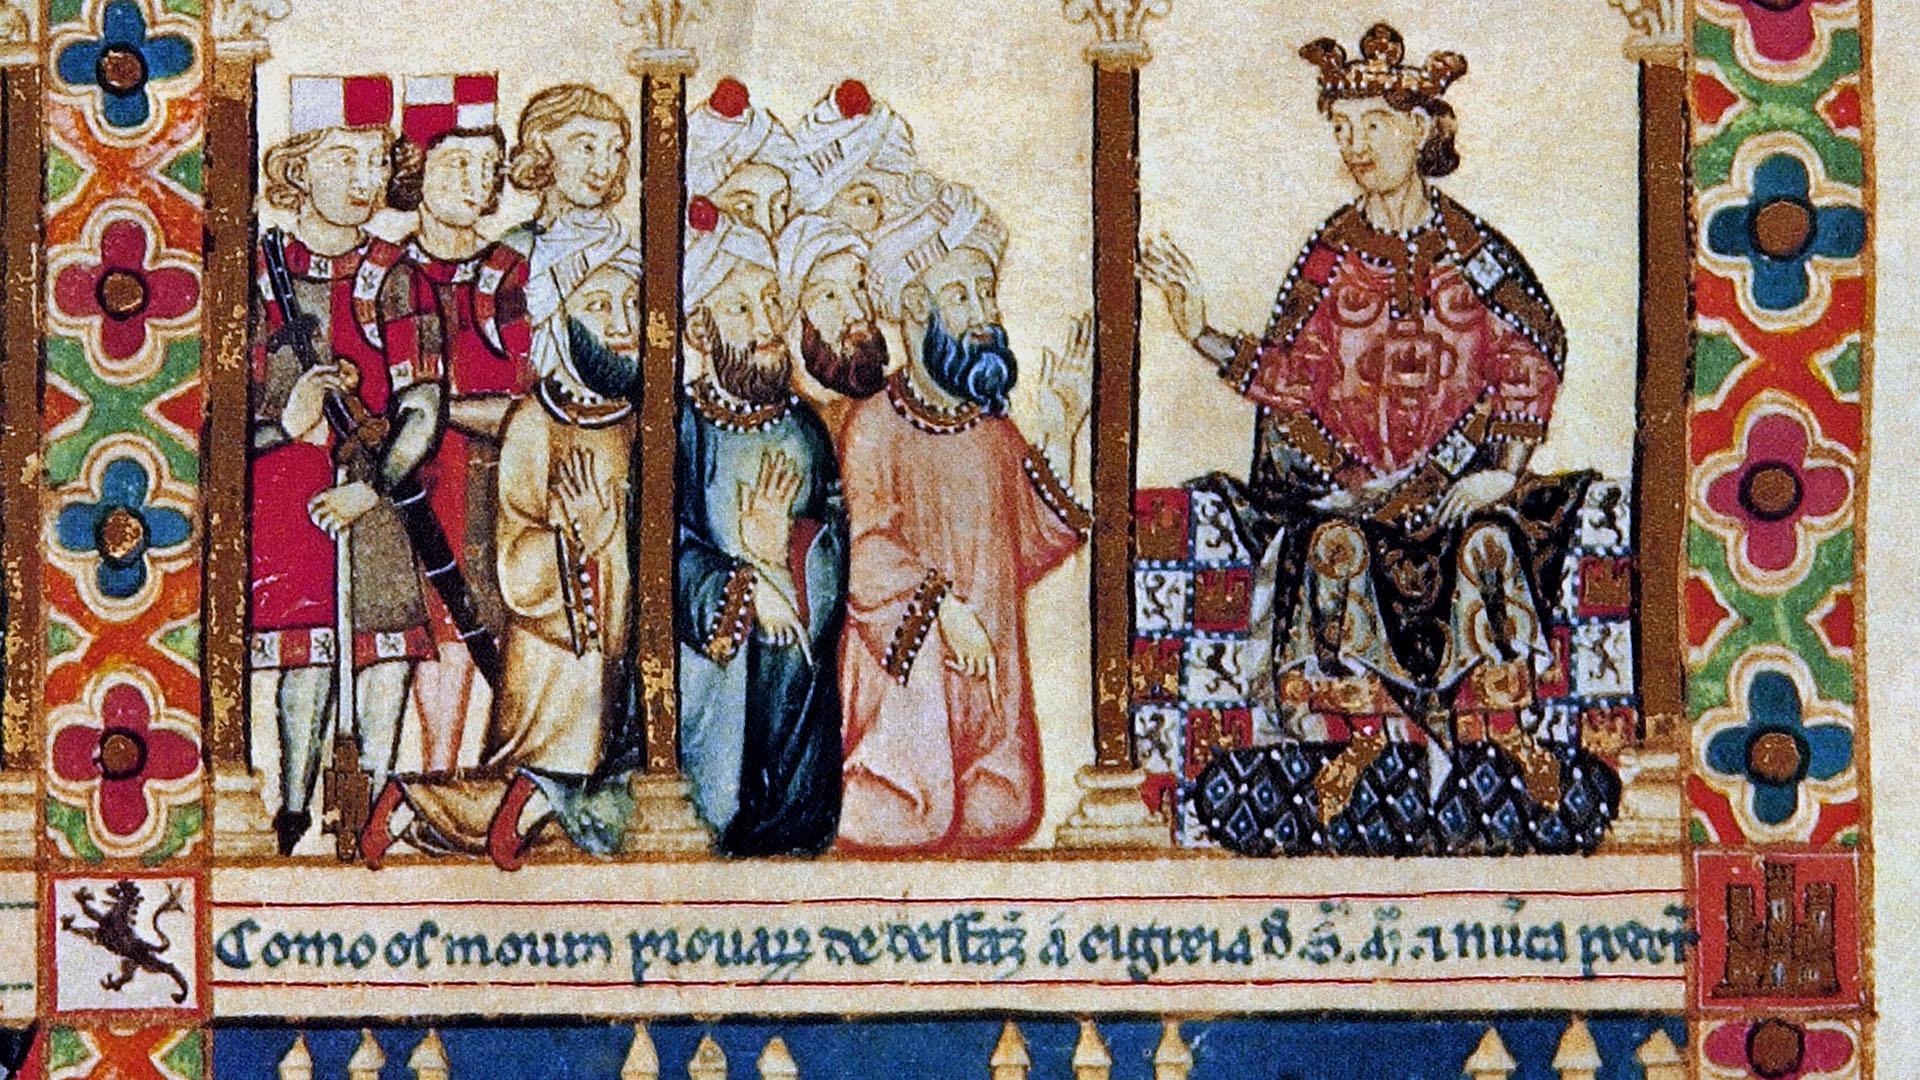 Image of Muslims at court of Alfonso X